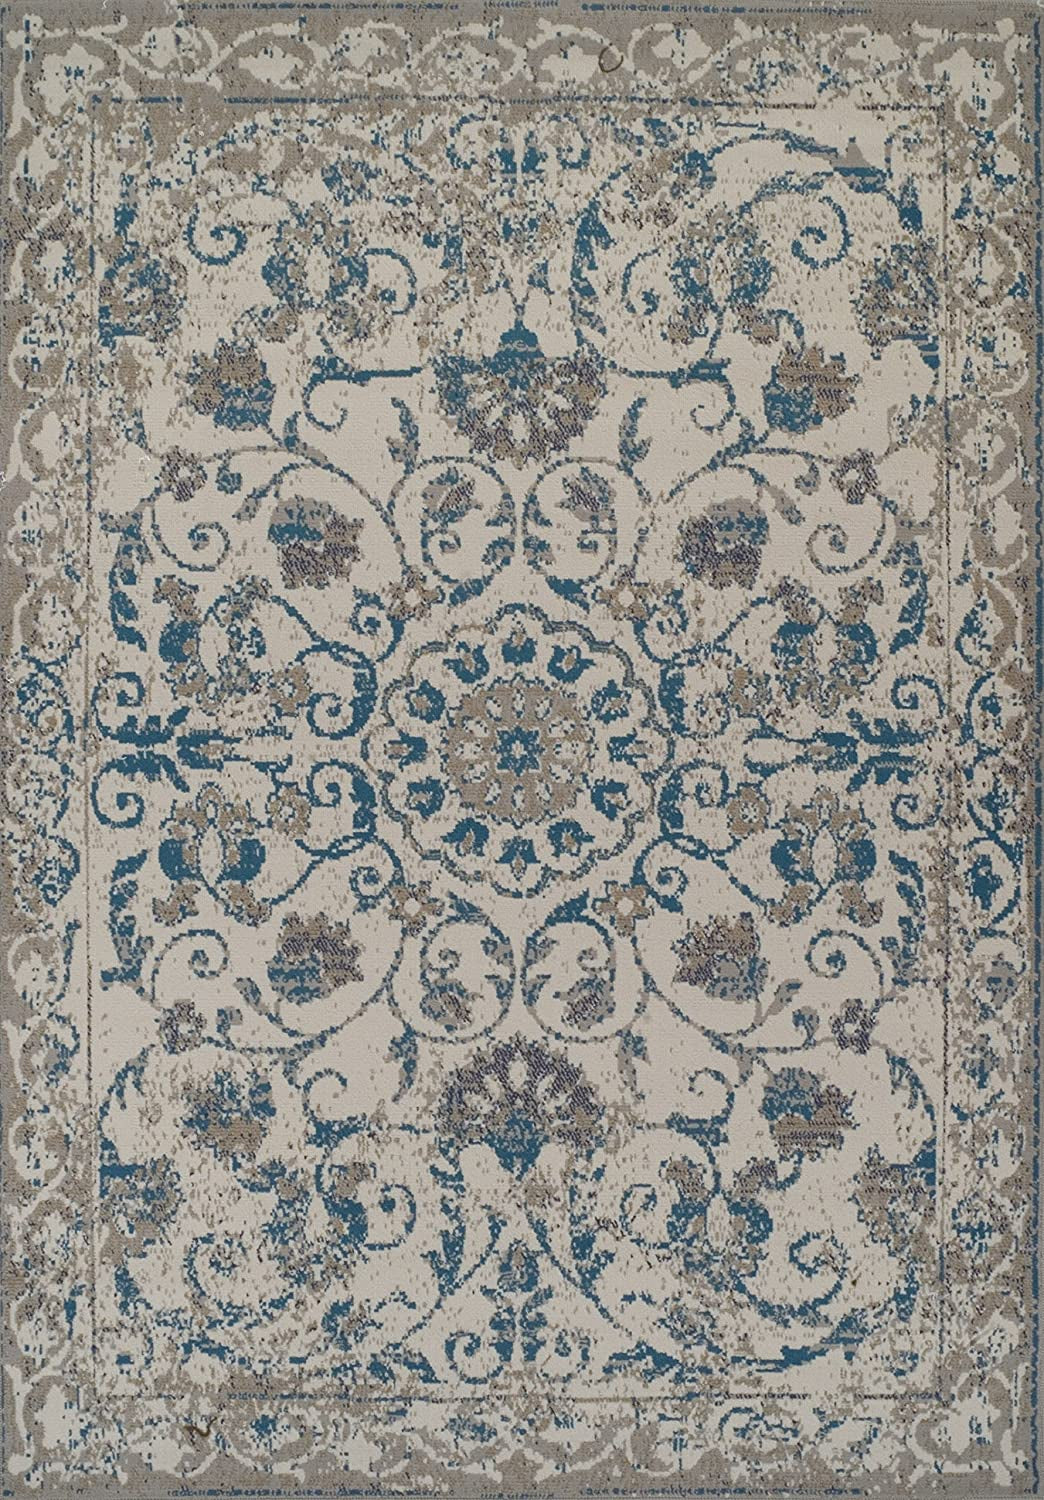 Traditional Vintage Area Rug Distressed Rugs Blue 5X8 Rugs Blue Turquoise Grey Beige 5X7 Kitchen Floor Rug